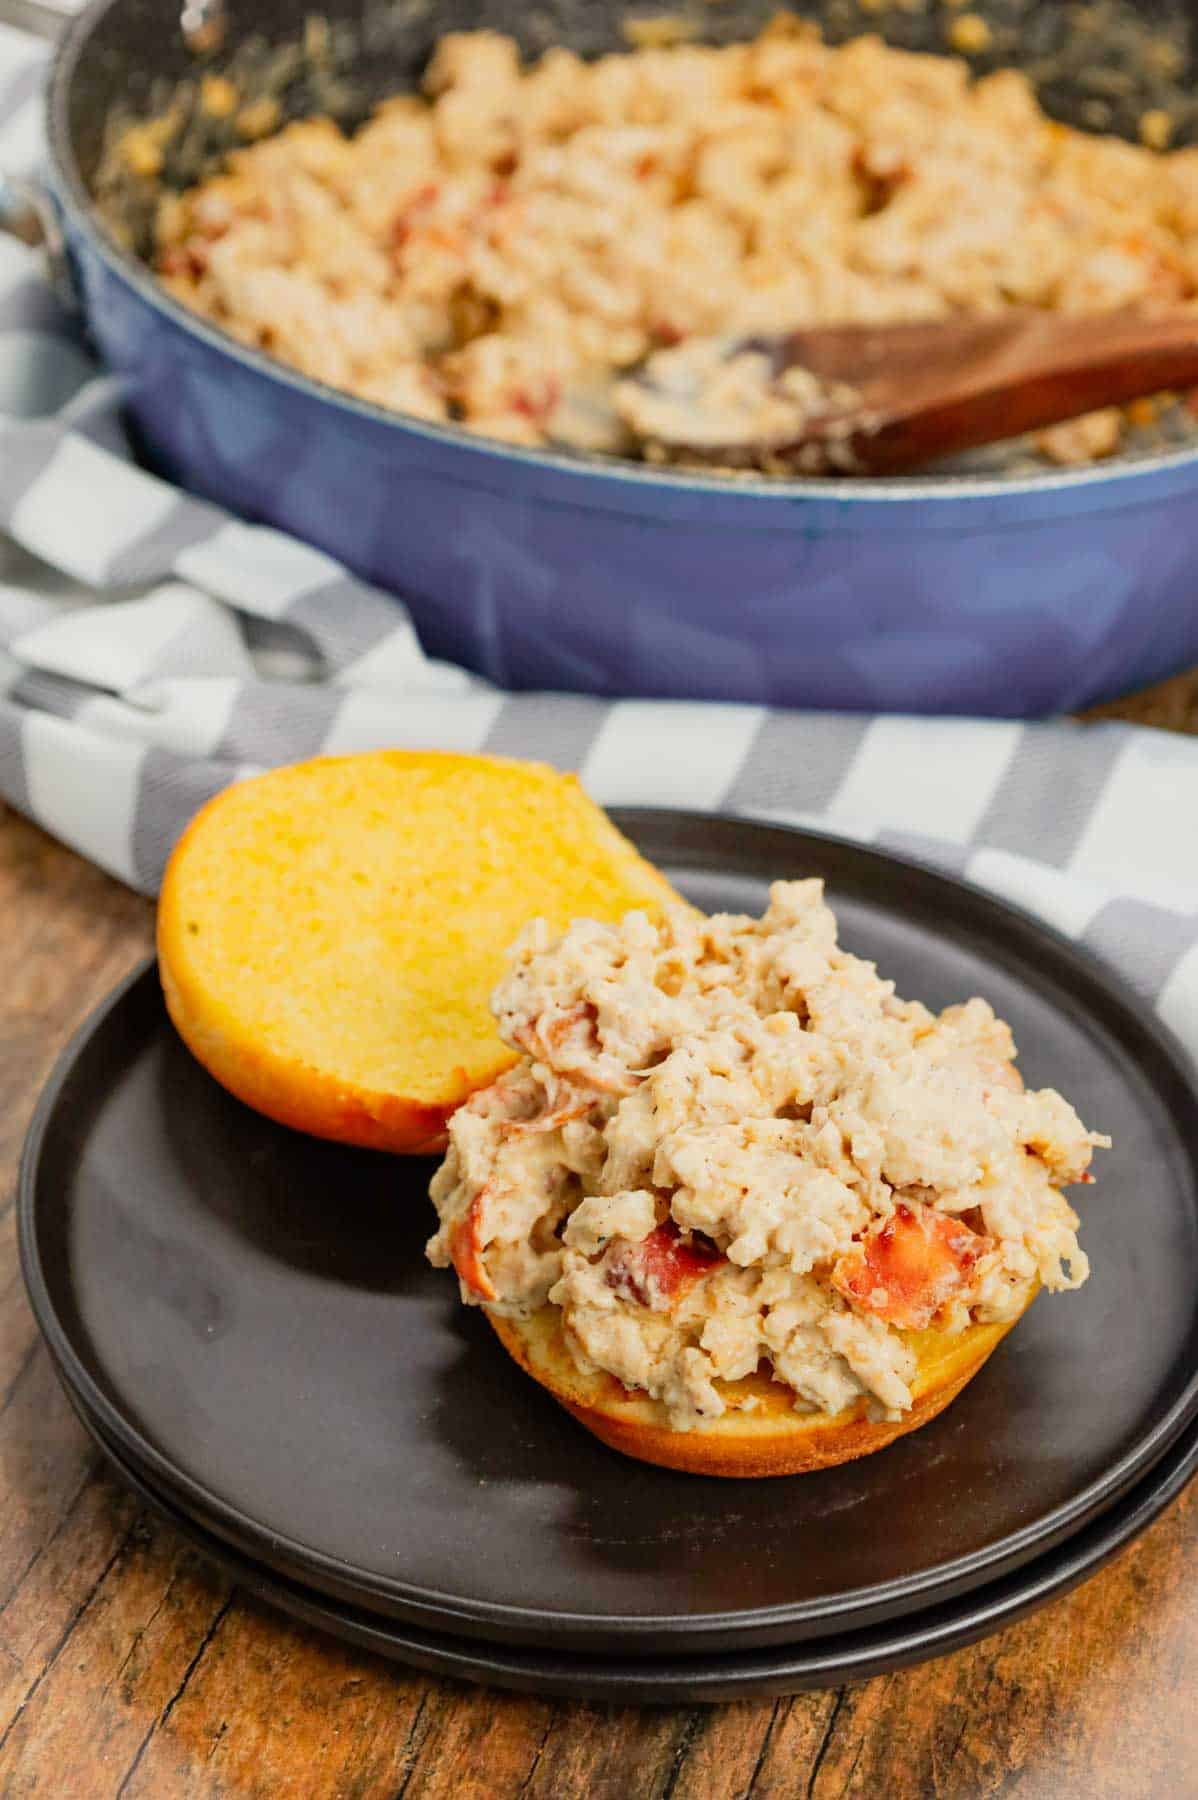 Chicken Alfredo Sloppy Joes are delicious sandwiches loaded with ground chicken and crisp bacon tossed in alfredo sauce and served on toasted garlic buttered brioche buns.